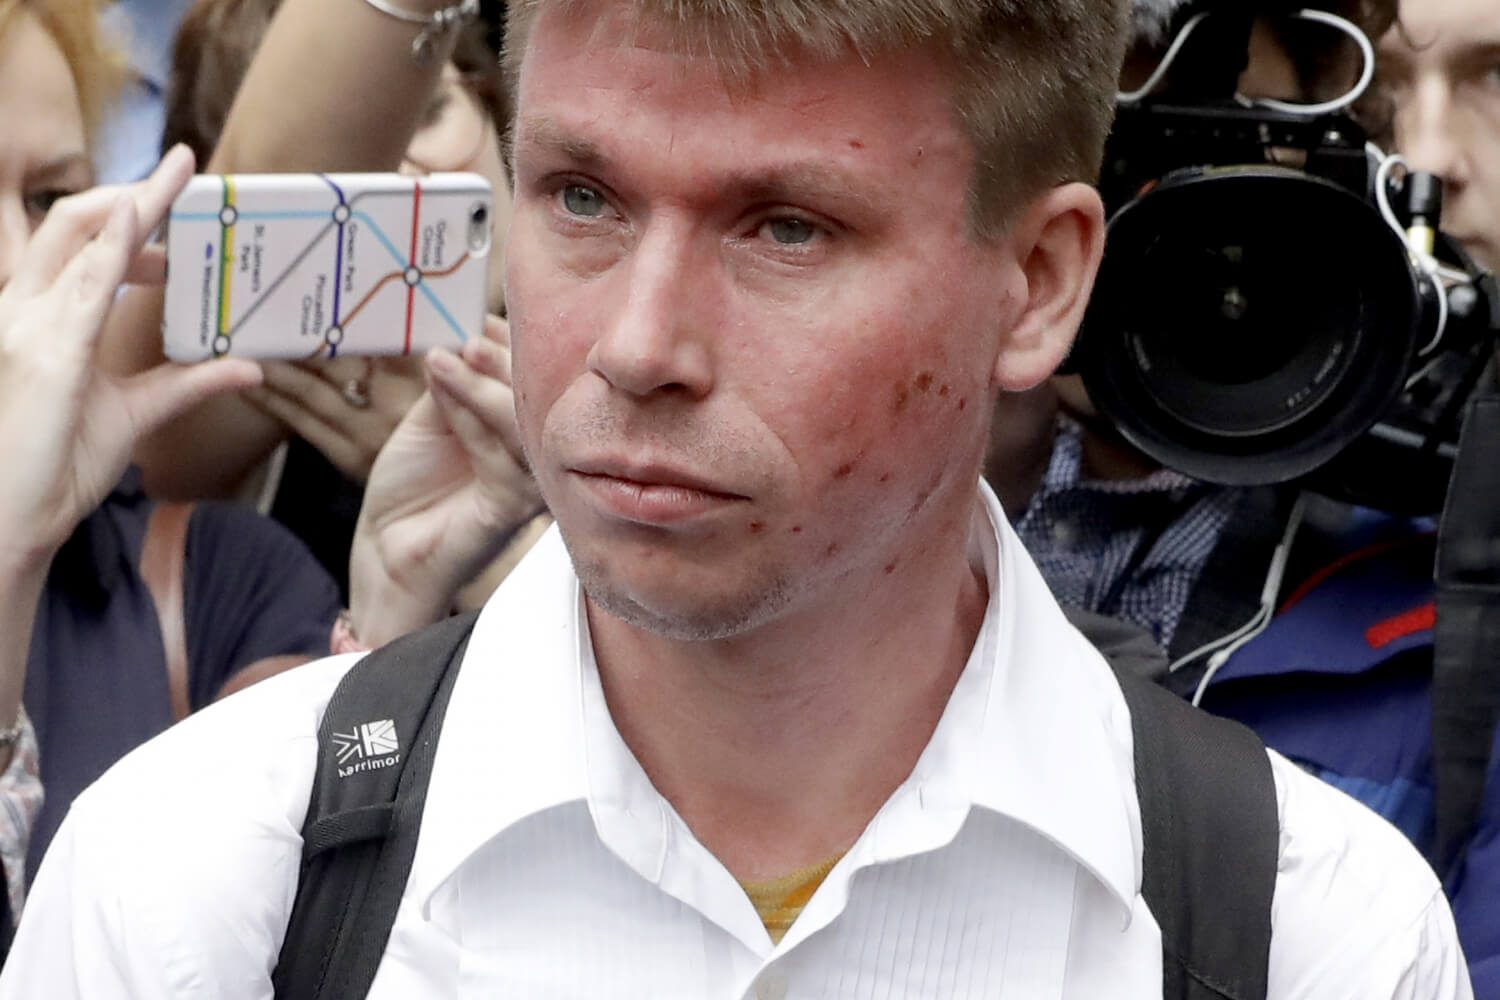 Alleged UK hacker Lauri Love wins appeal against extradition to the US